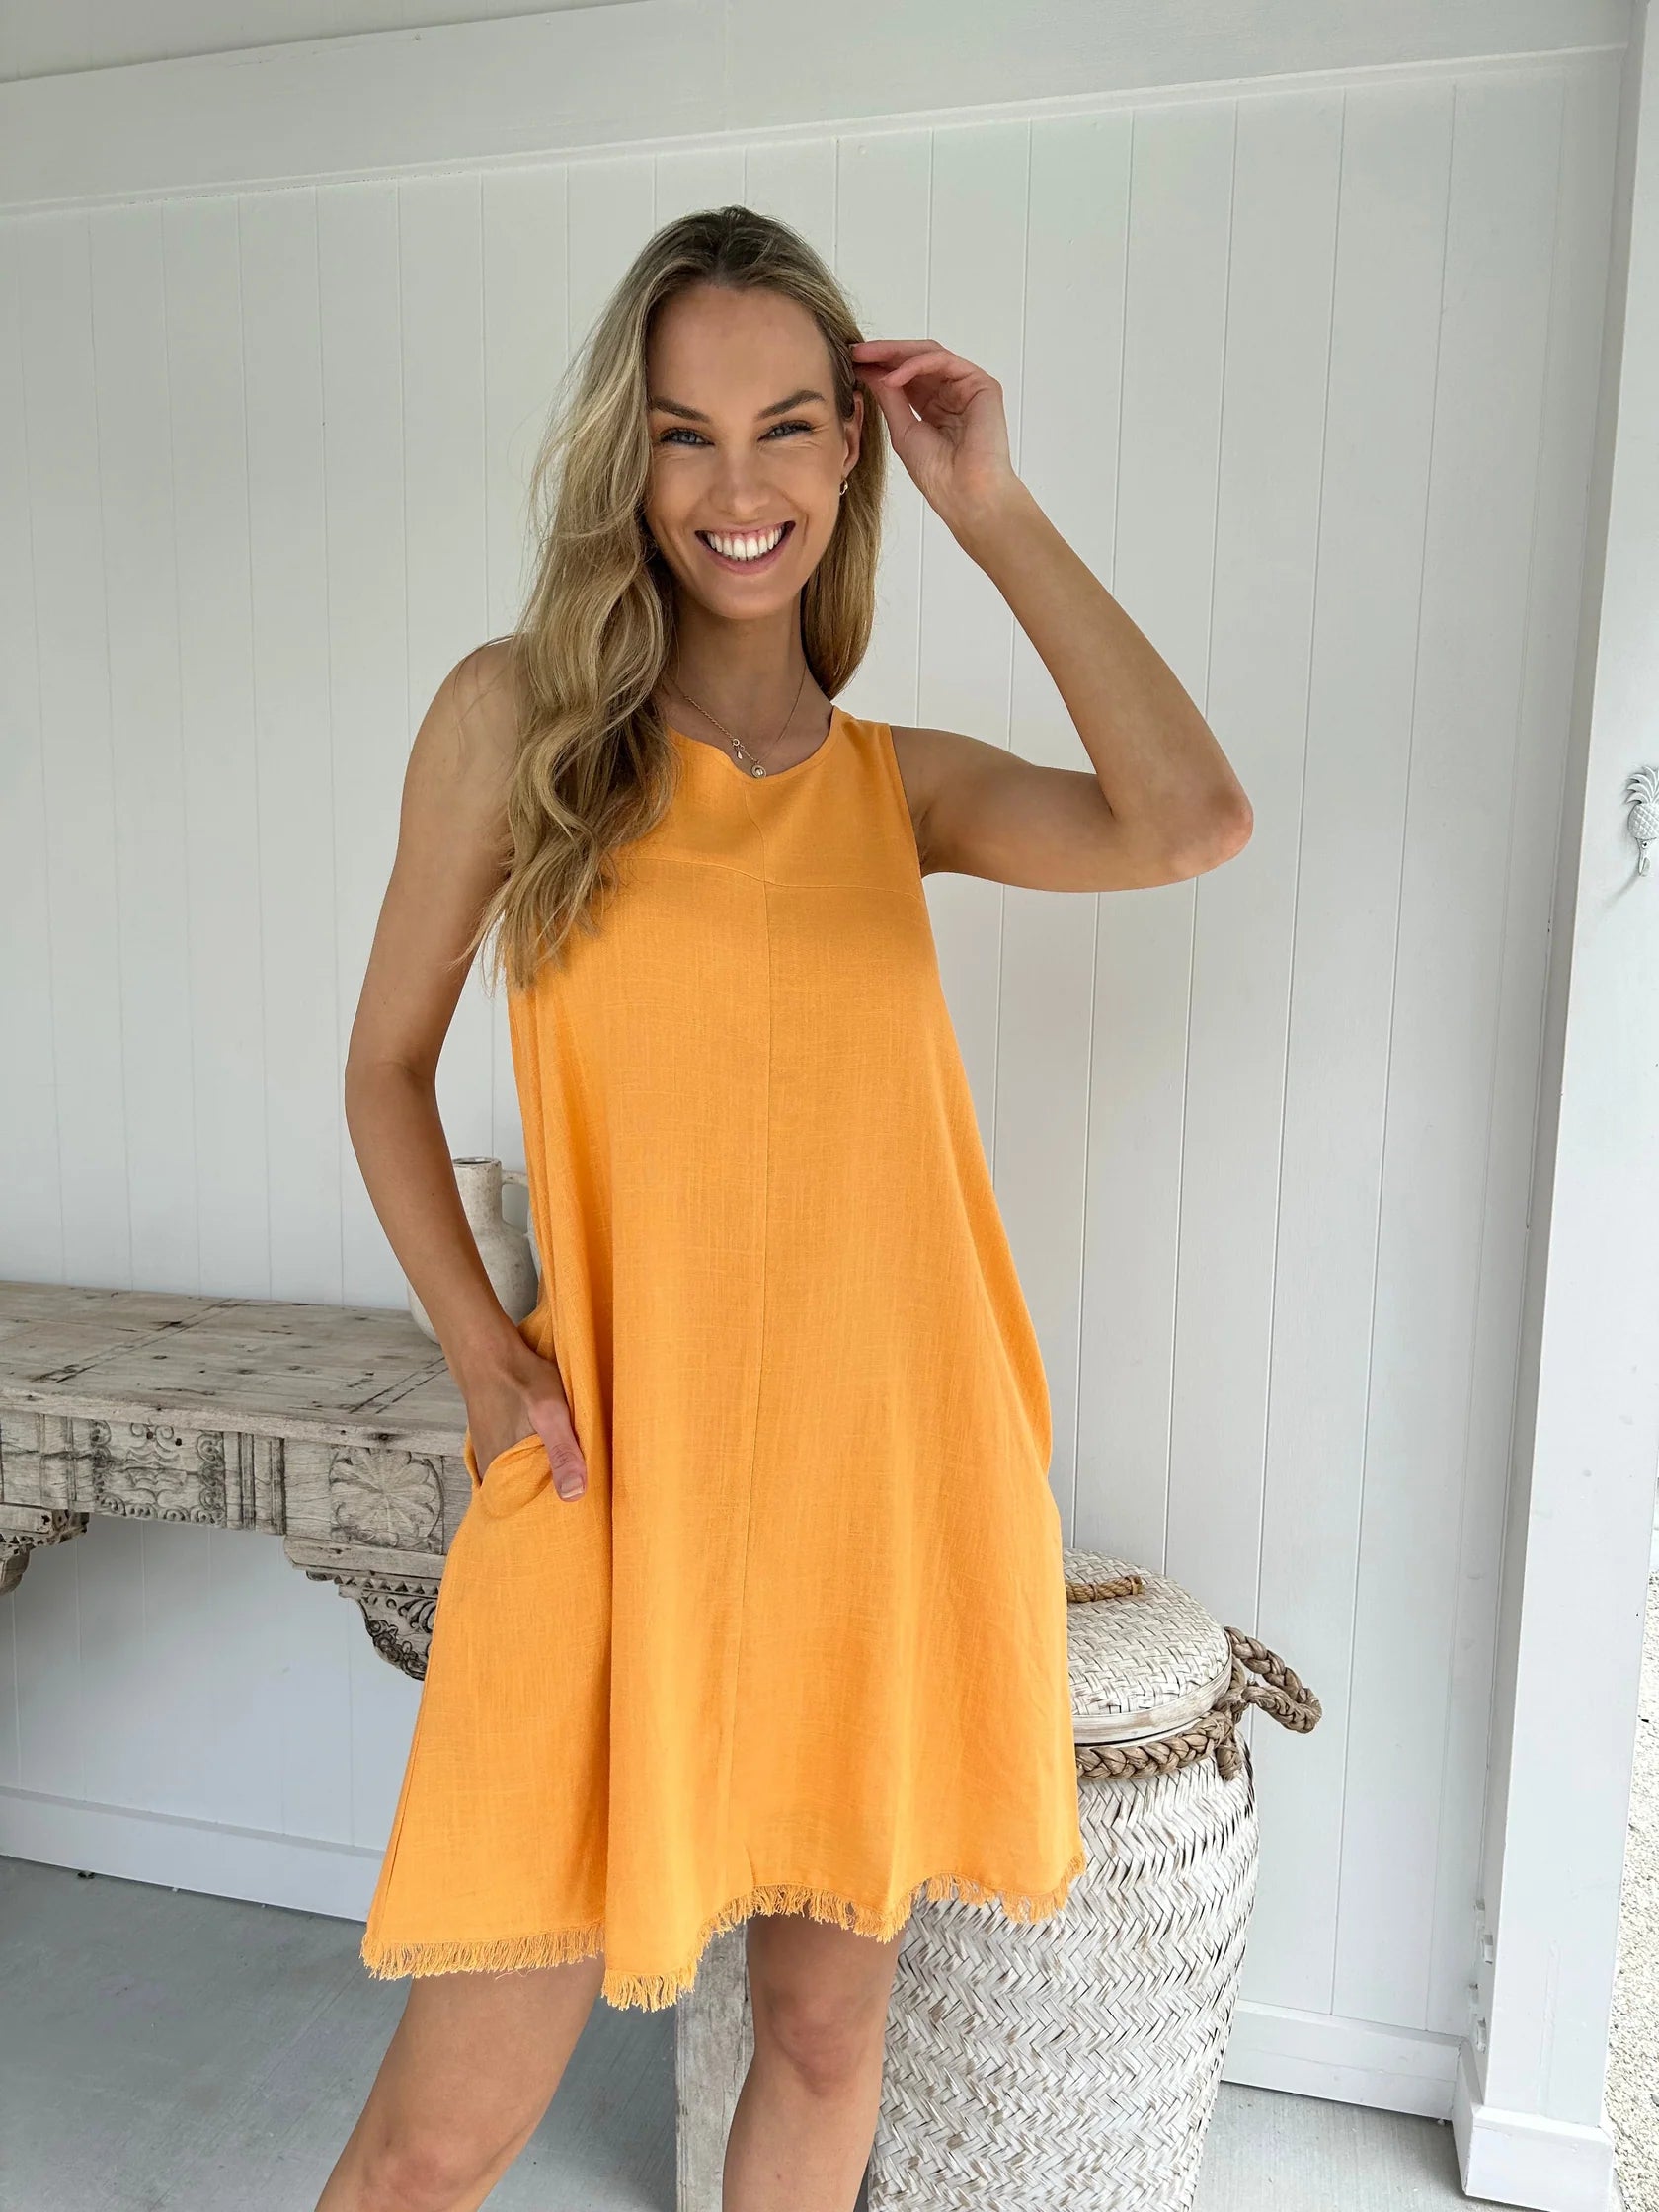 Be inspired by the beauty of nature with this Freya Mini Dress. Featuring a gorgeous earthy orange, a frayed hem, and pockets, this shift fit dress is both stylish and practical. Its lightweight fabric is fully lined to keep you feeling comfortable and looking chic all day long. Perfect for any occasion.